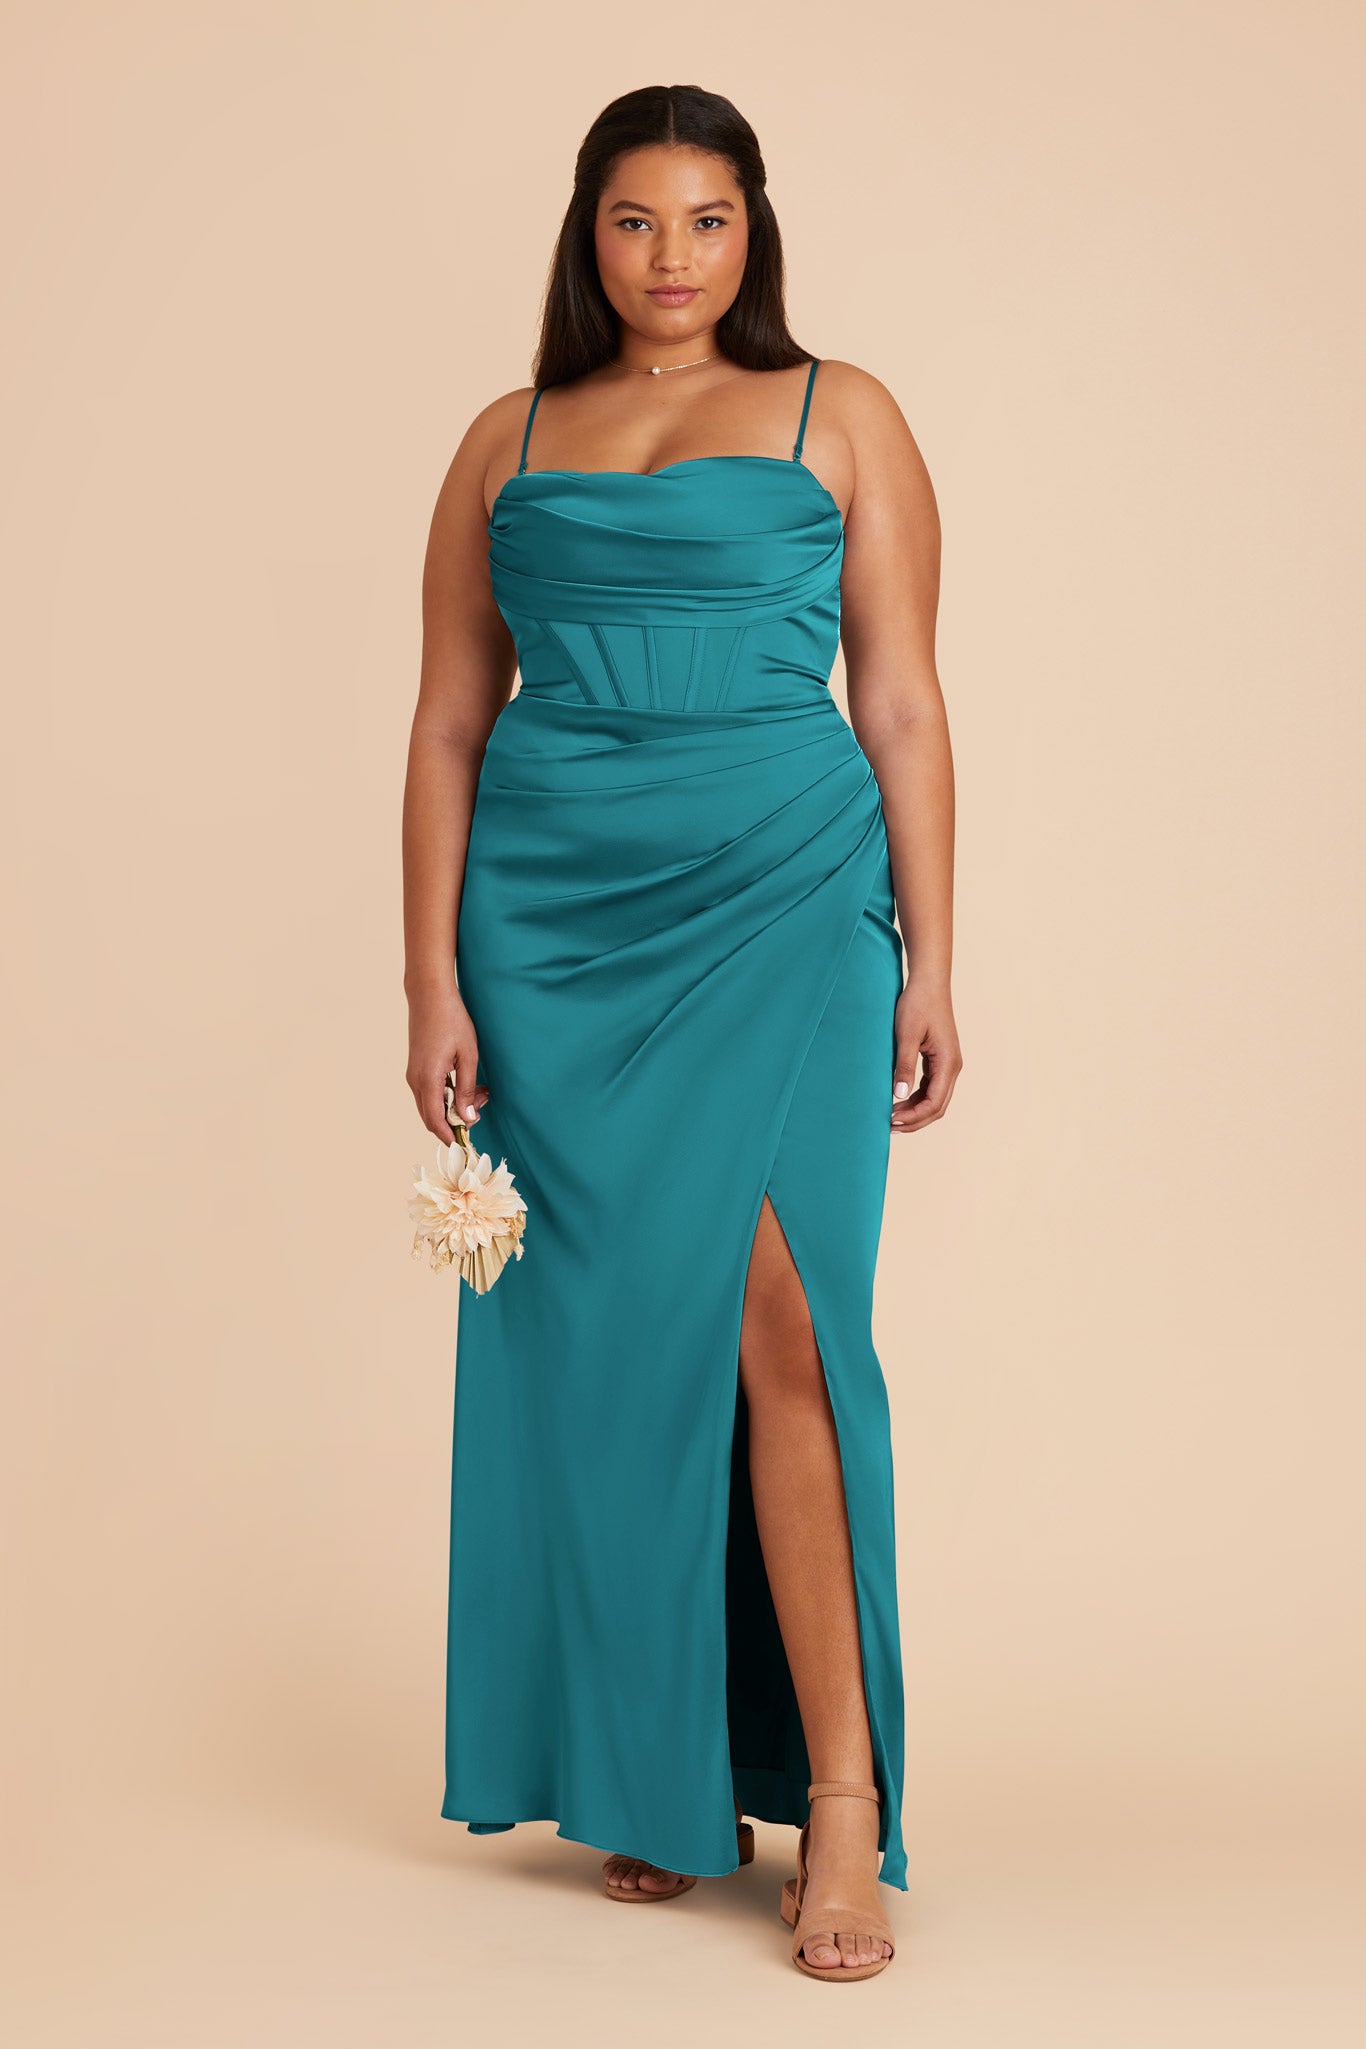 Teal Carrie Matte Satin Dress by Birdy Grey